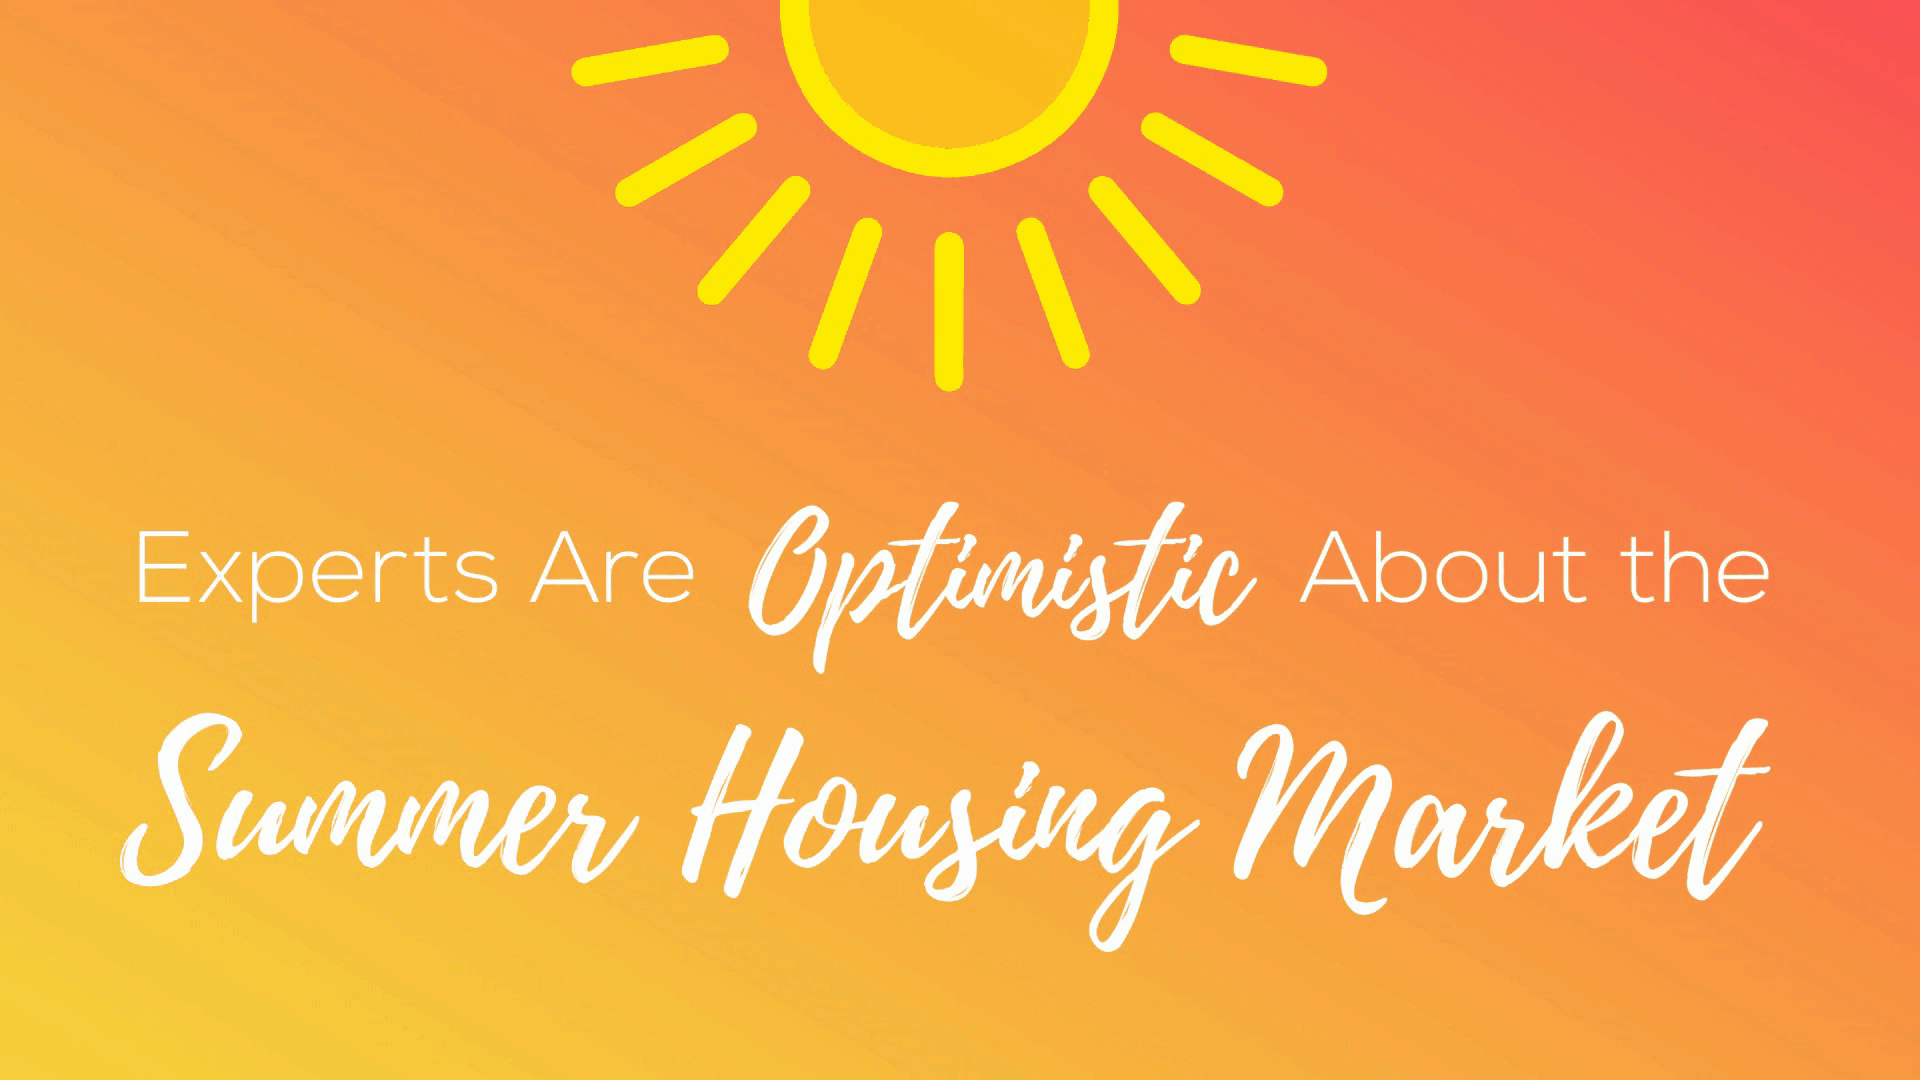 Optimistic About the Summer 2021 Housing Market